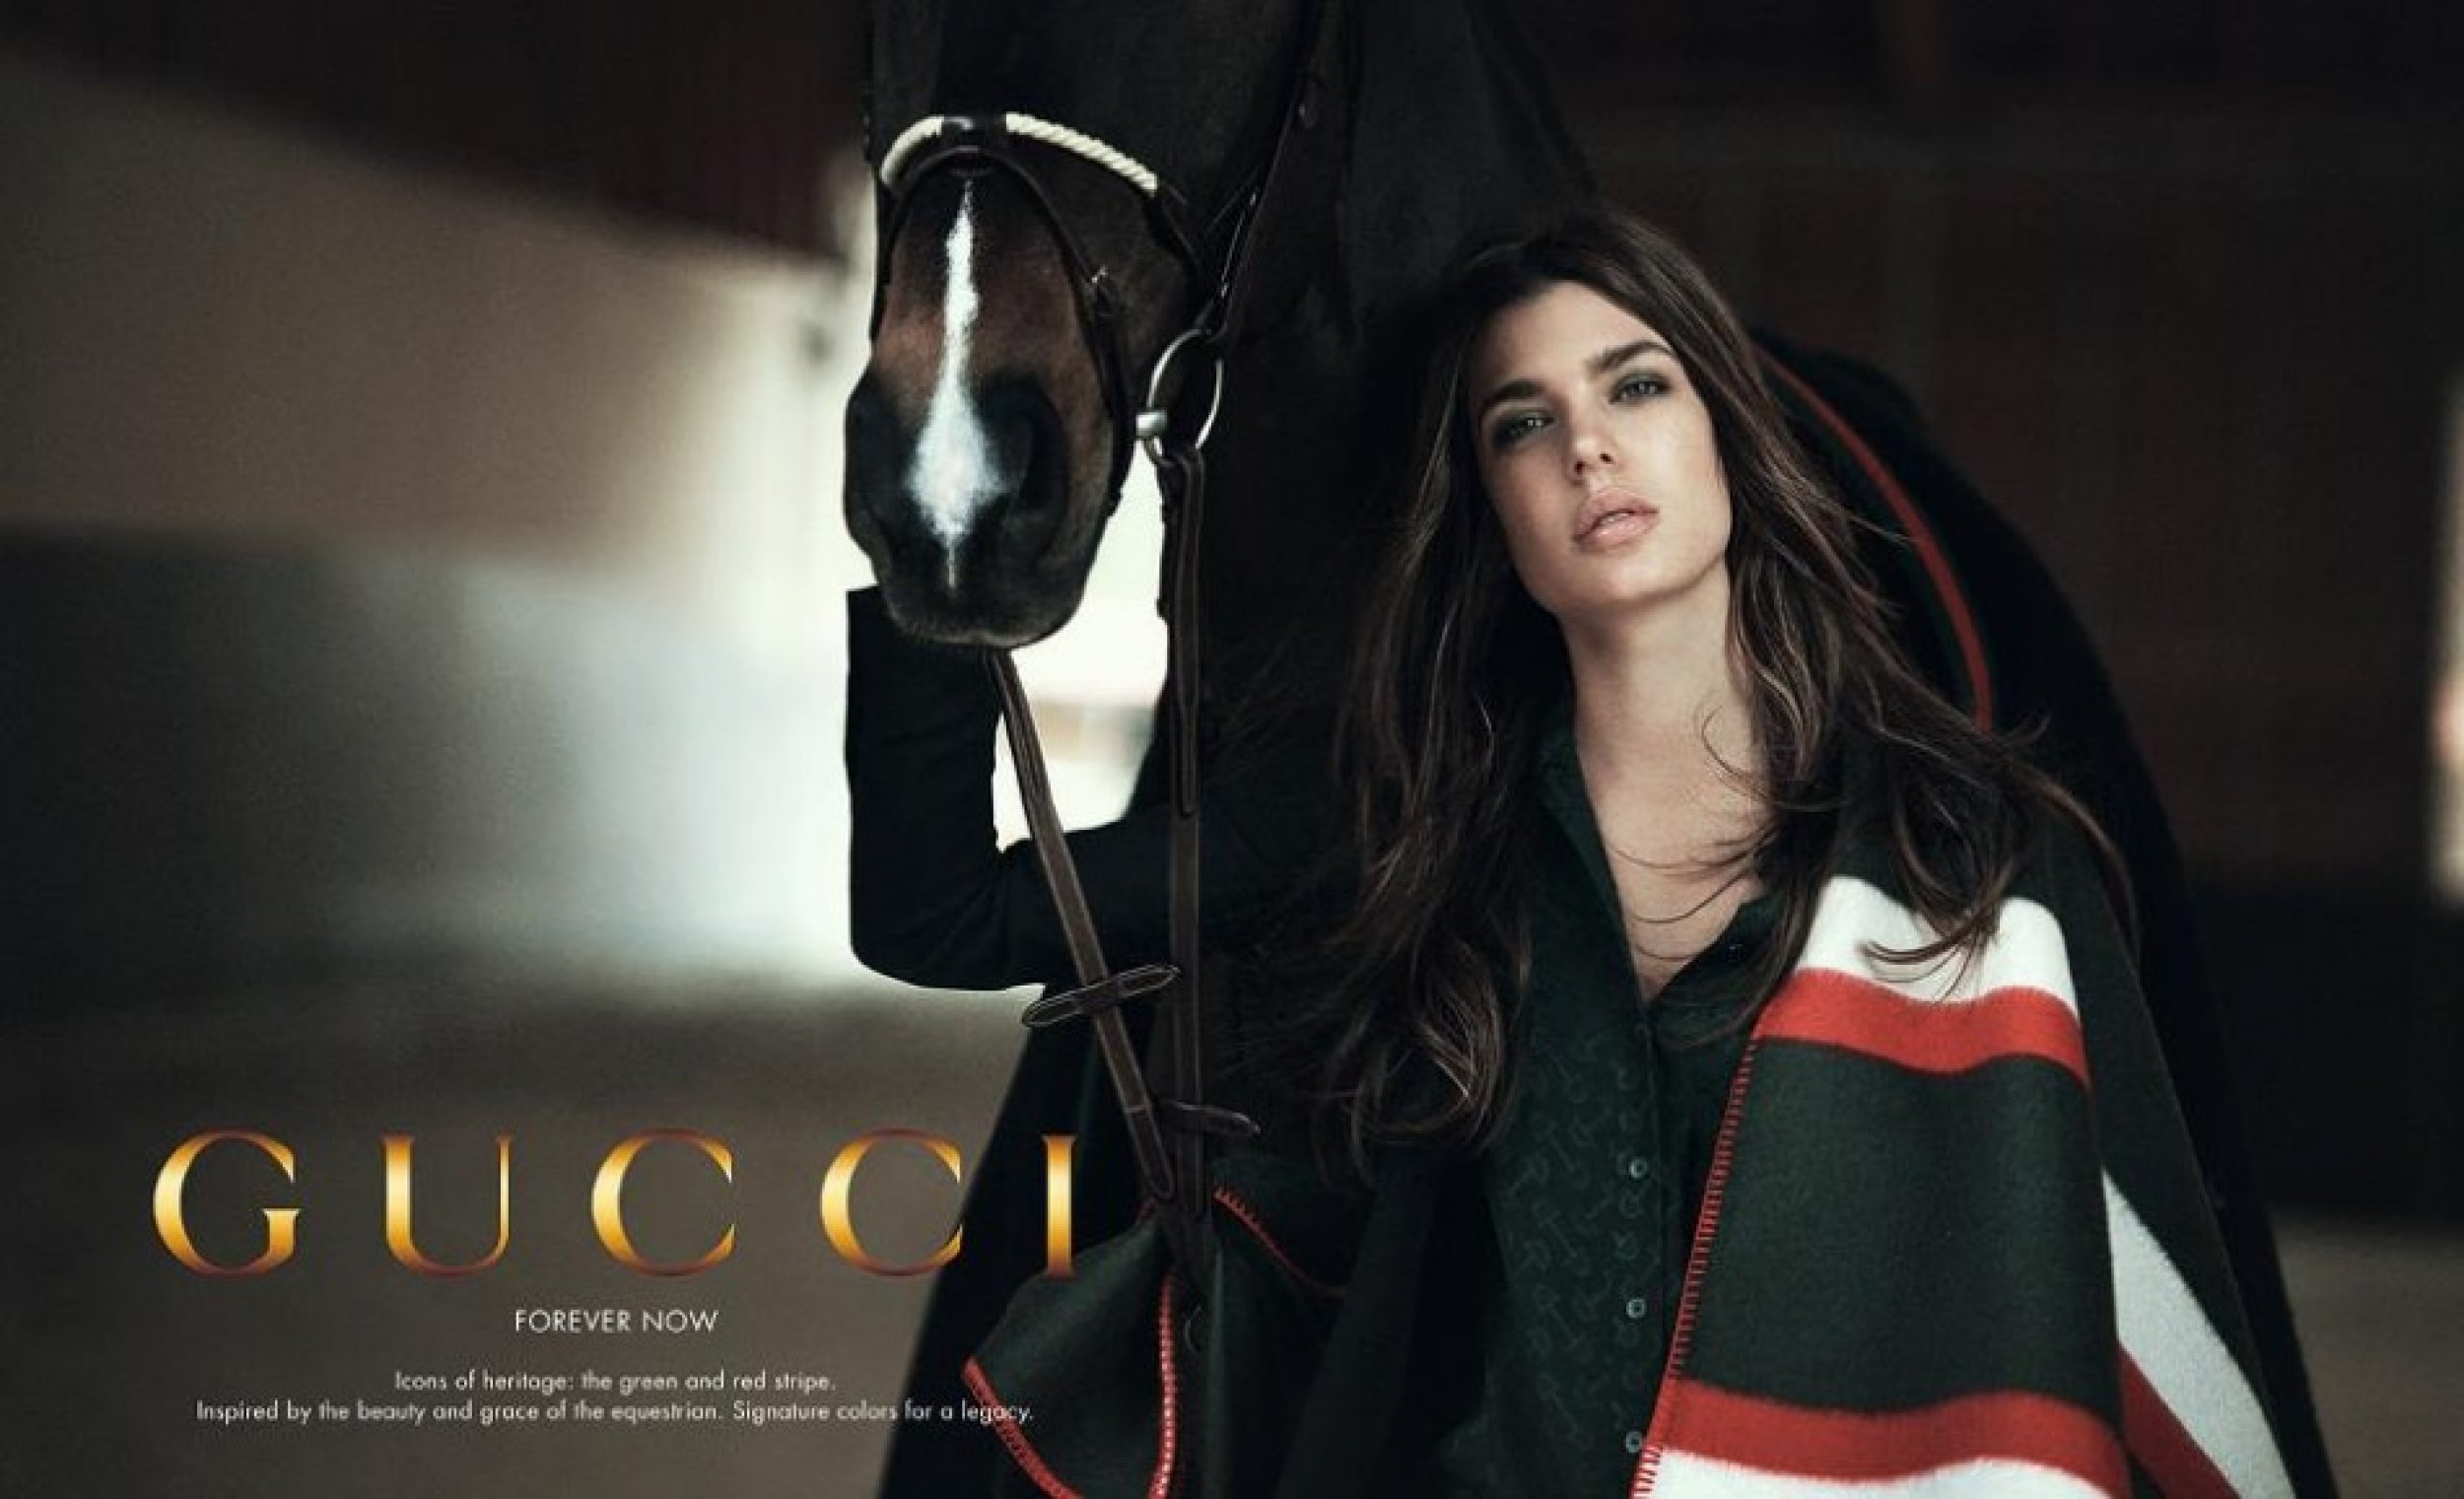 First Look Royal Princess Charlotte Casiraghis Forever Now Campaign for Gucci